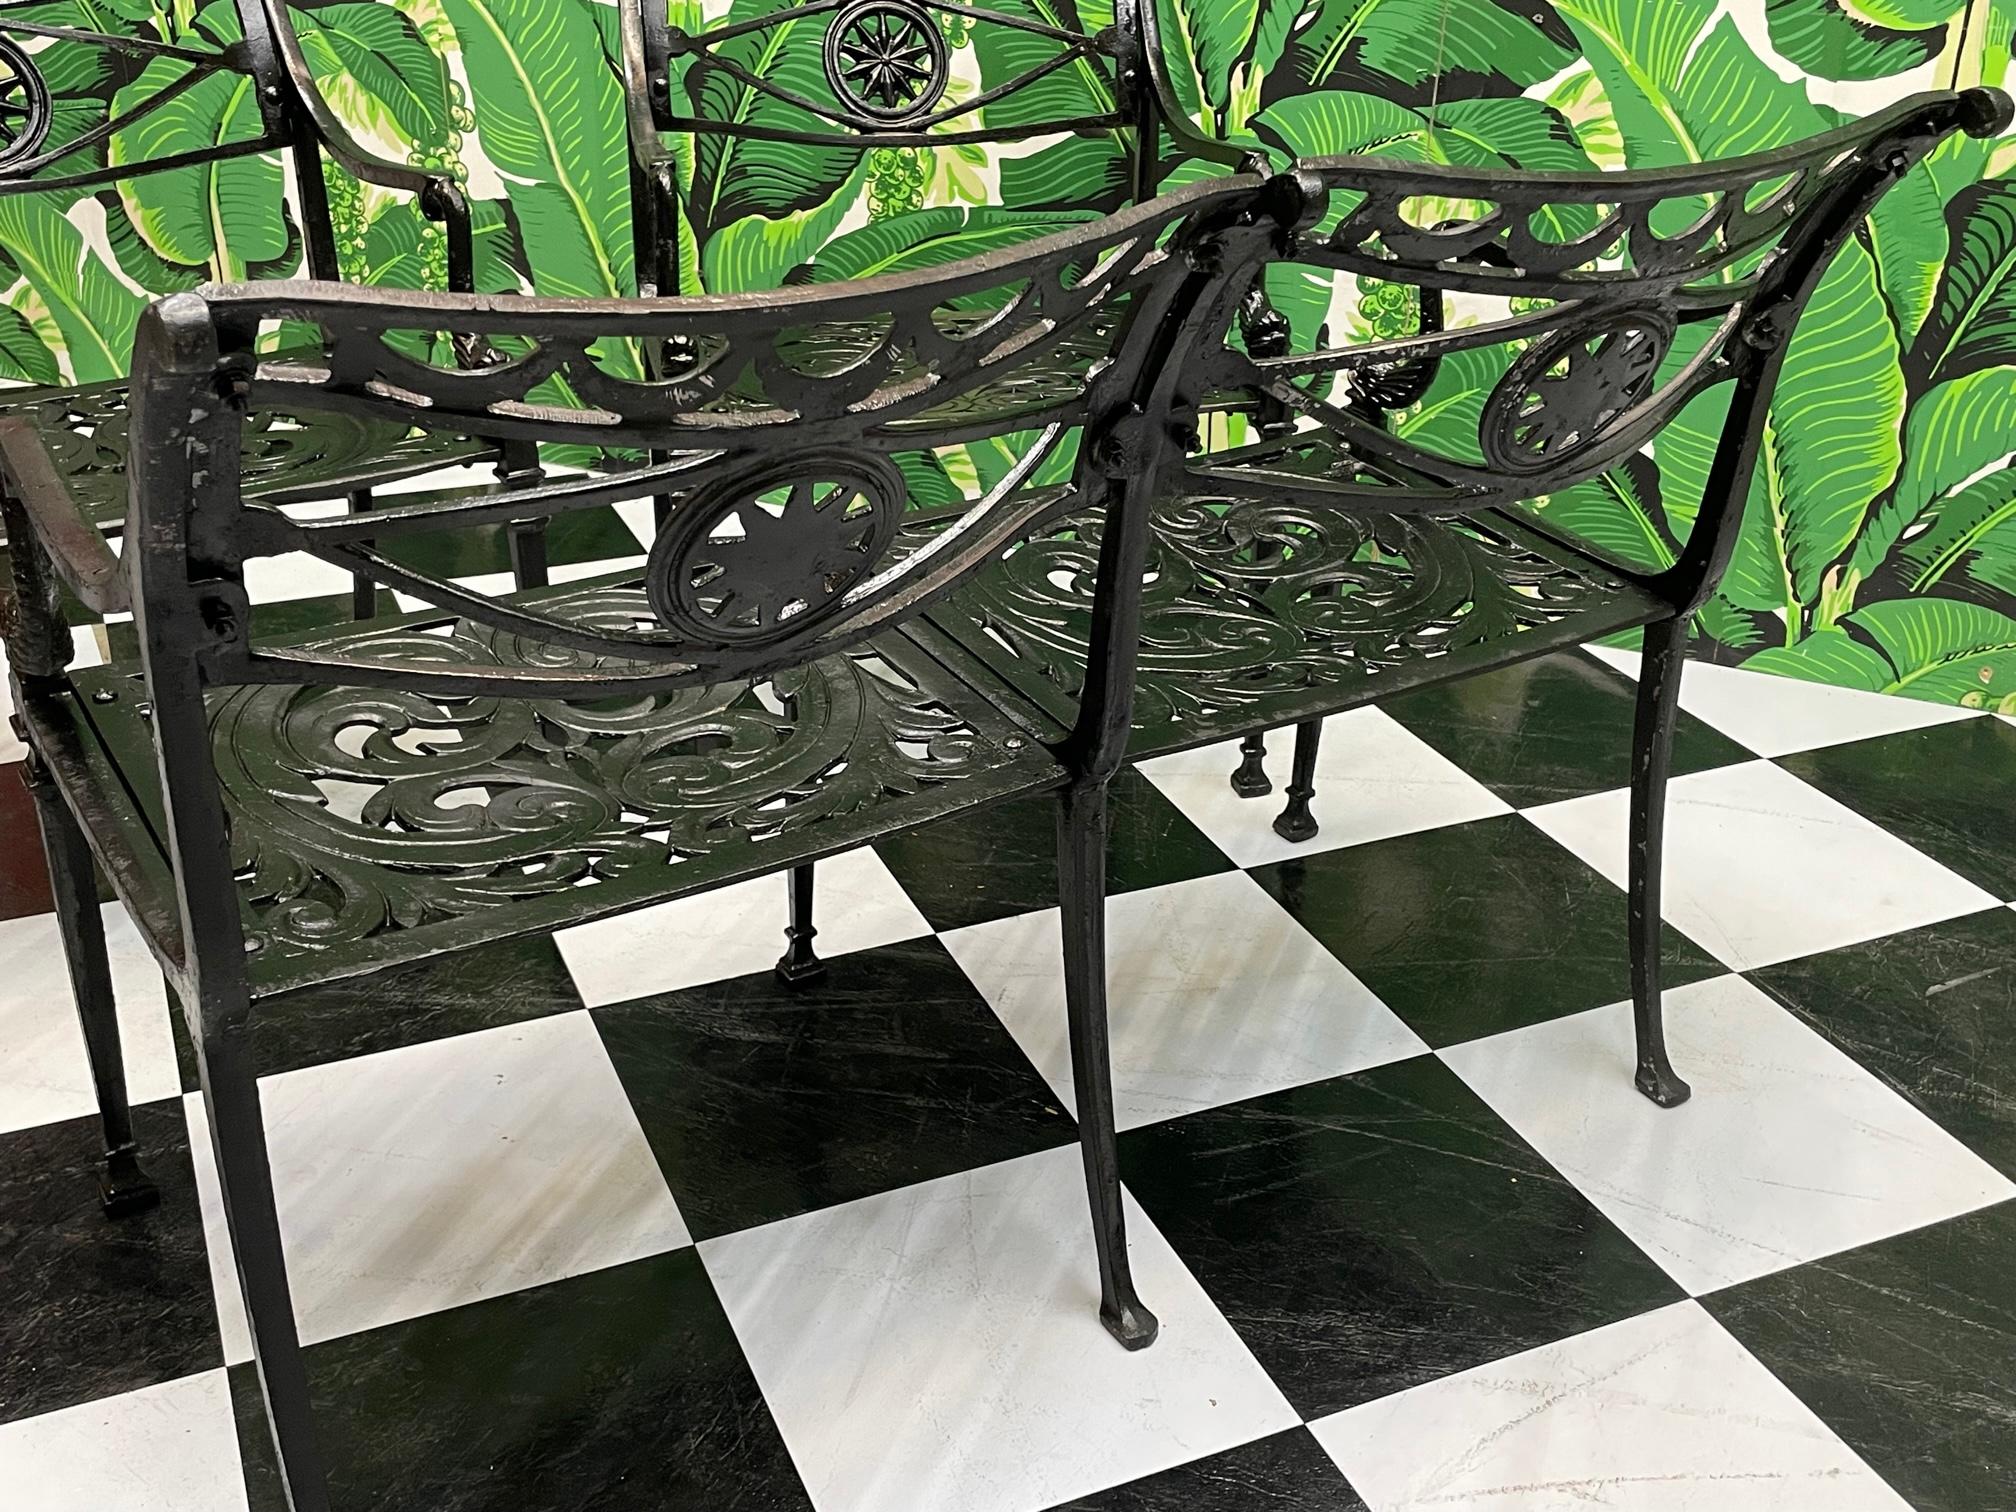 Star and dolphin motif patio bench in cast aluminum. Neoclassic style with fabric swags, acanthus leaf seat, coupled with Asian influence dolphins as arm supports. Good condition with imperfections consistent with age, structurally sound, see photos